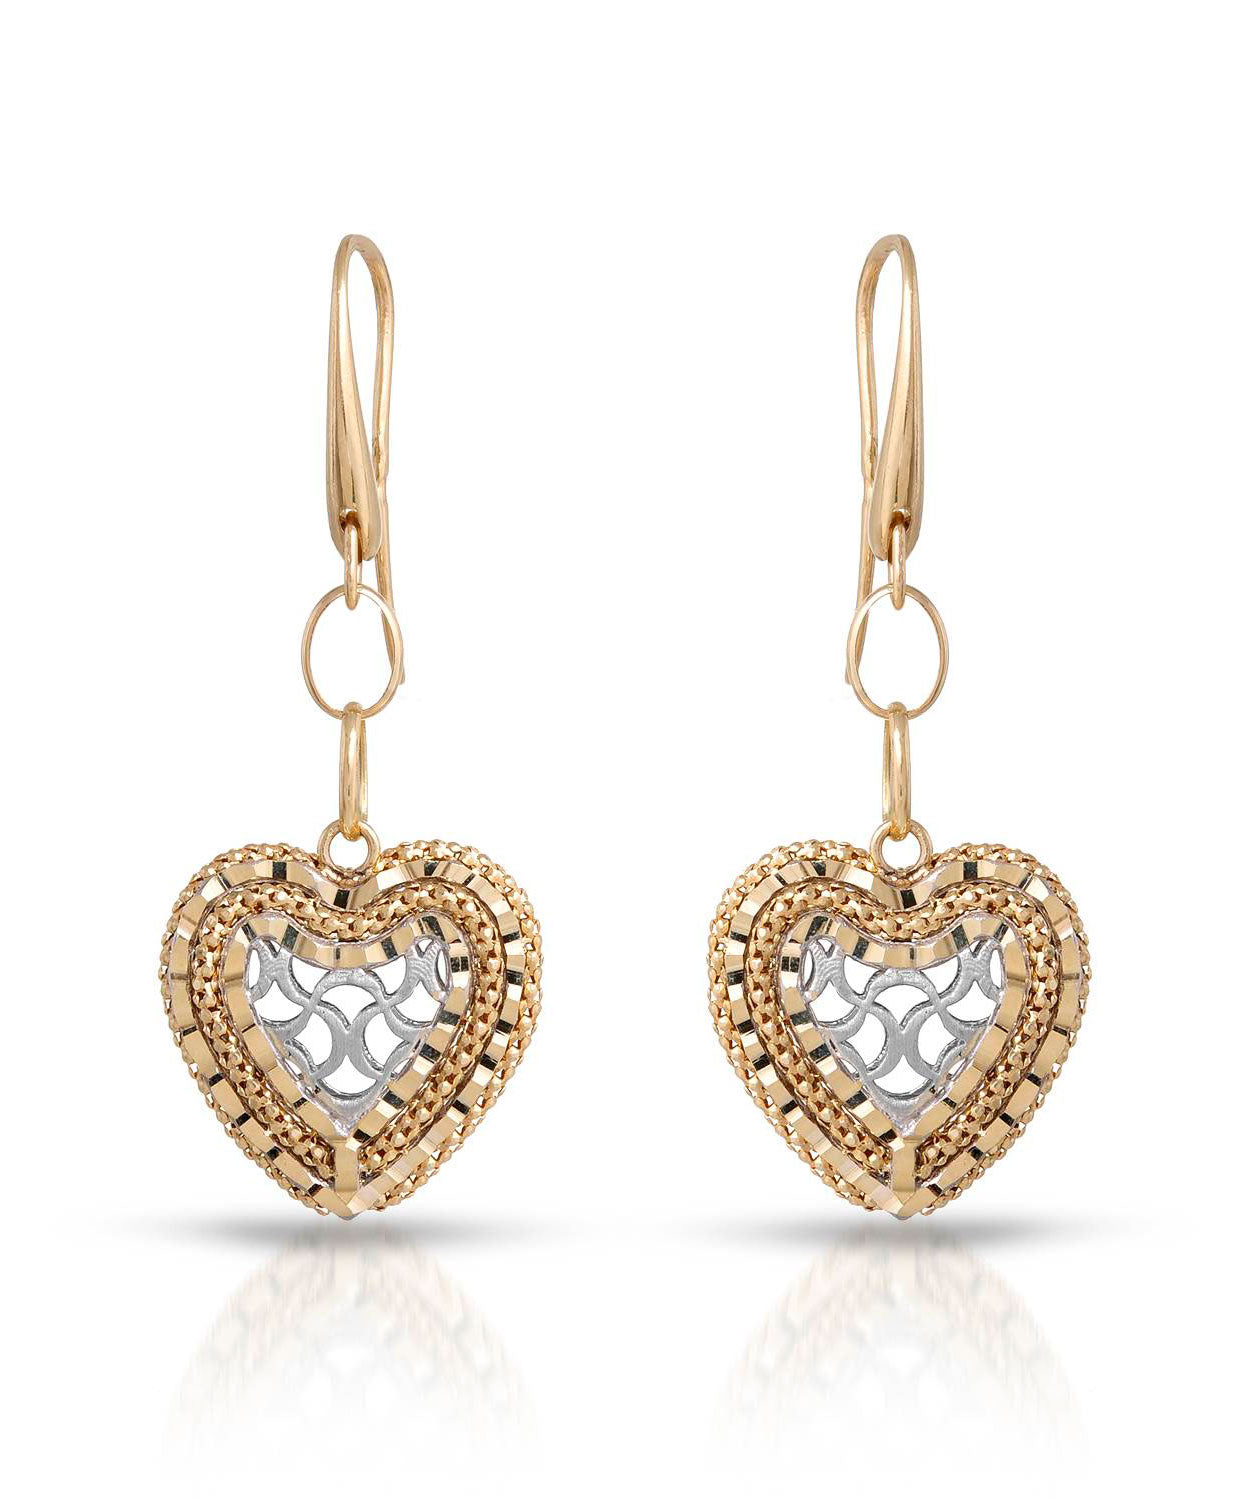 14k Gold Heart Dangle Earrings - Made in Italy View 1